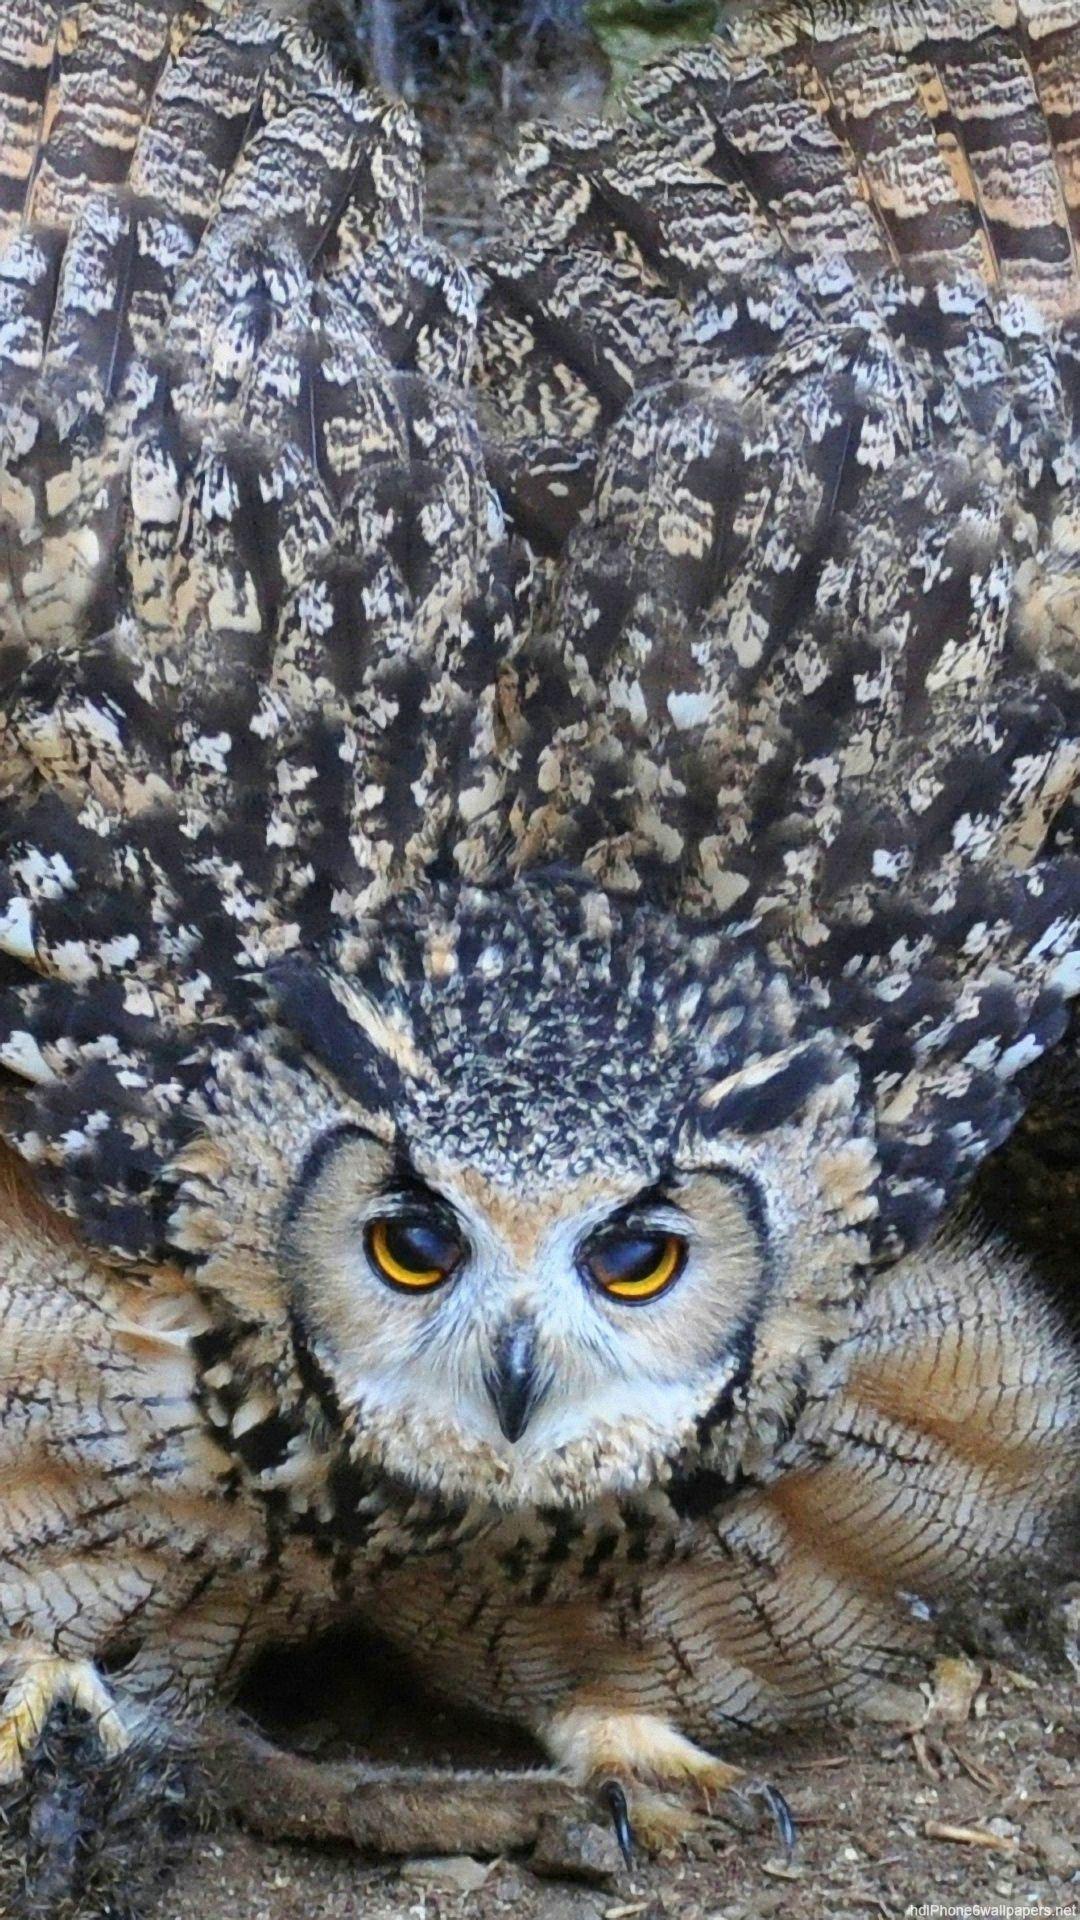 Owl iPhone Wallpapers - Top Free Owl iPhone Backgrounds - WallpaperAccess